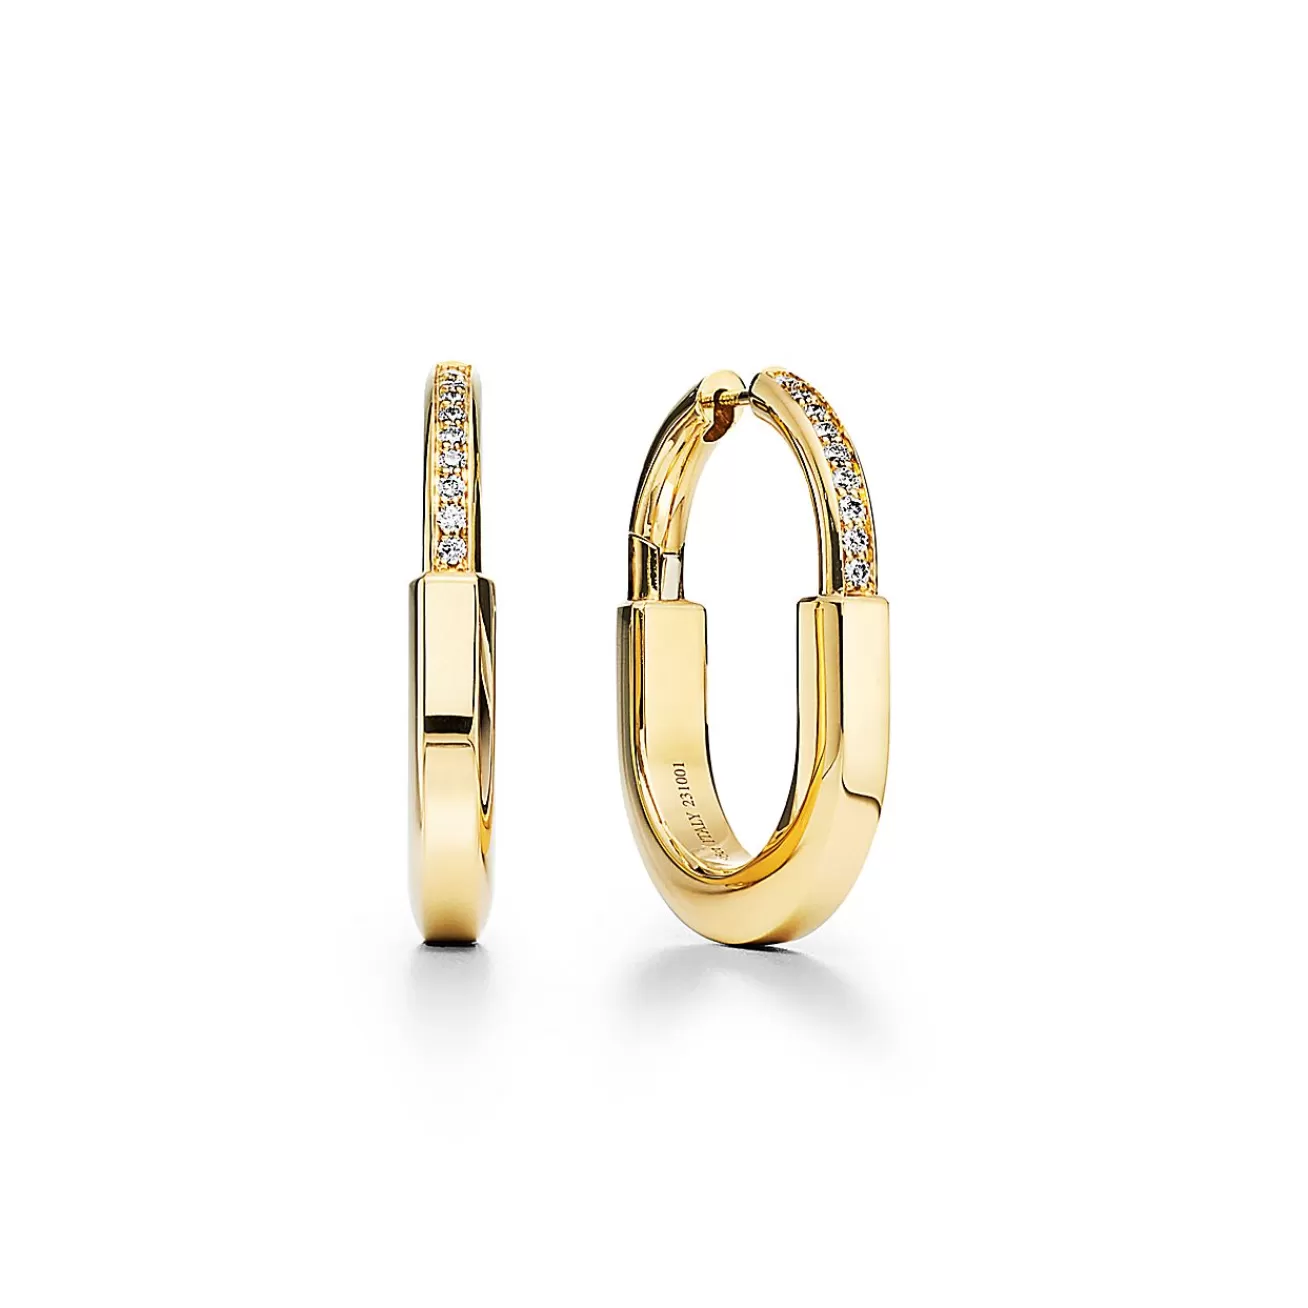 Tiffany & Co. Tiffany Lock Earrings in Yellow Gold with Diamonds, Medium | ^ Earrings | Gifts for Her